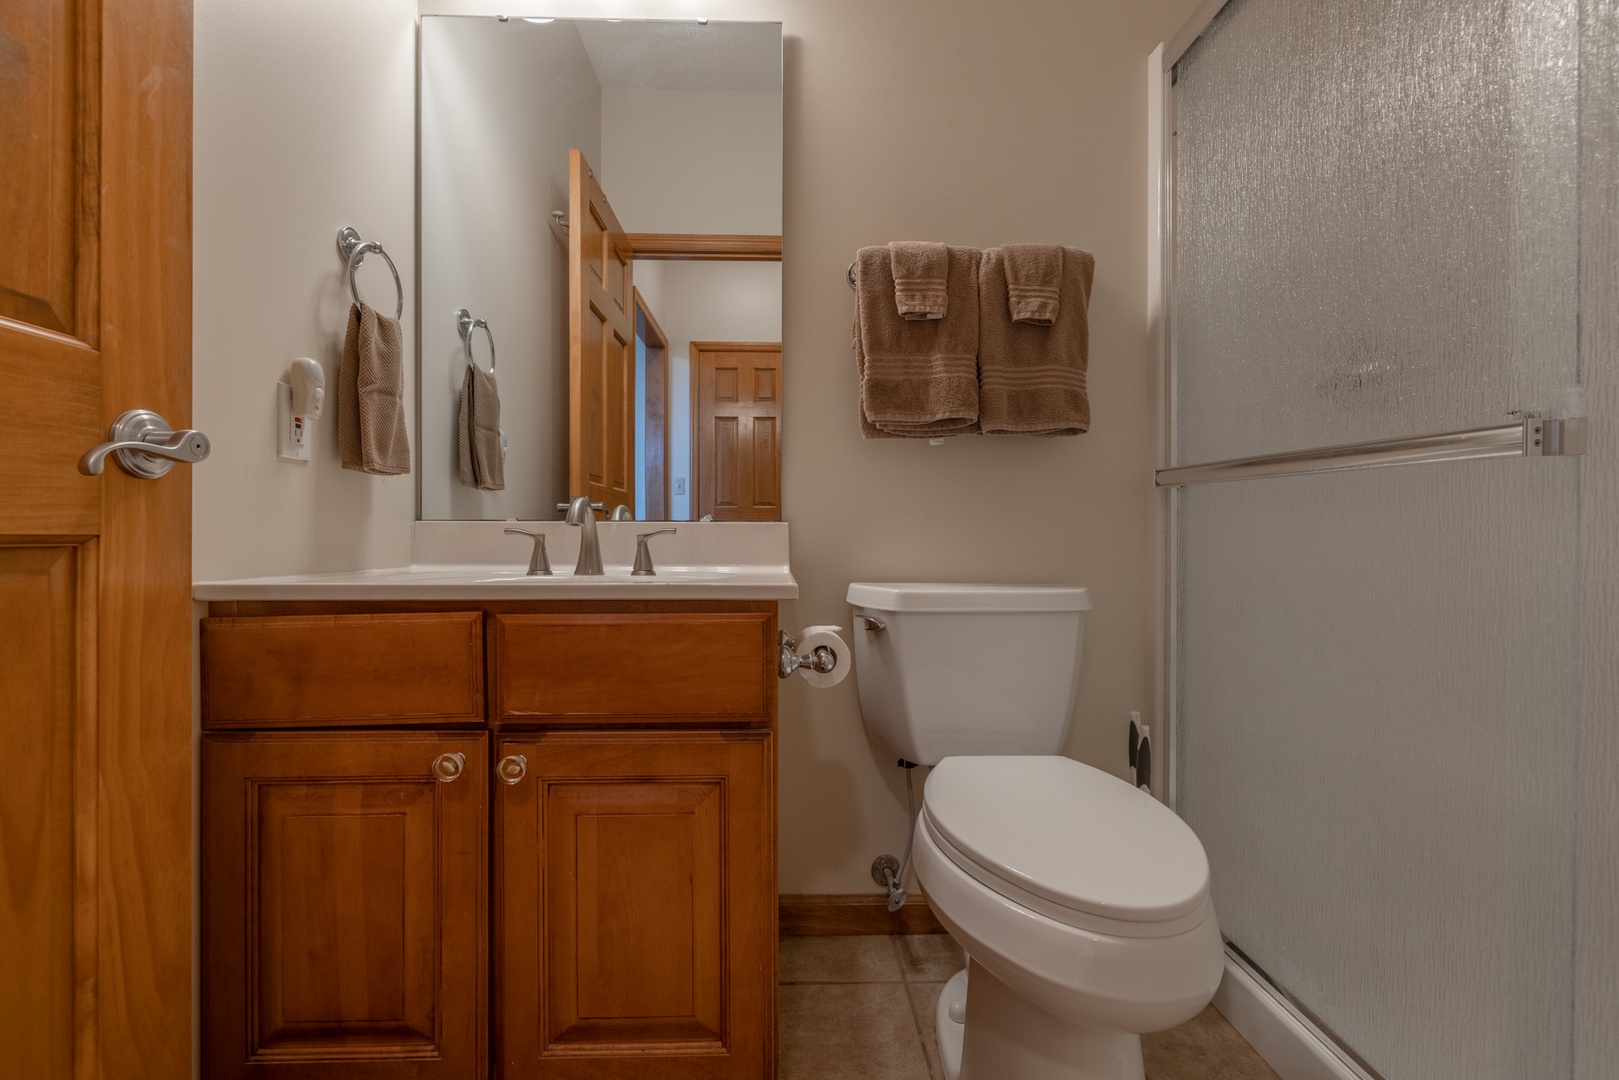 An additional full bathroom on the main level provides plenty of space for guests to freshen up after a day of exploring Innsbrook's resort-style amenities